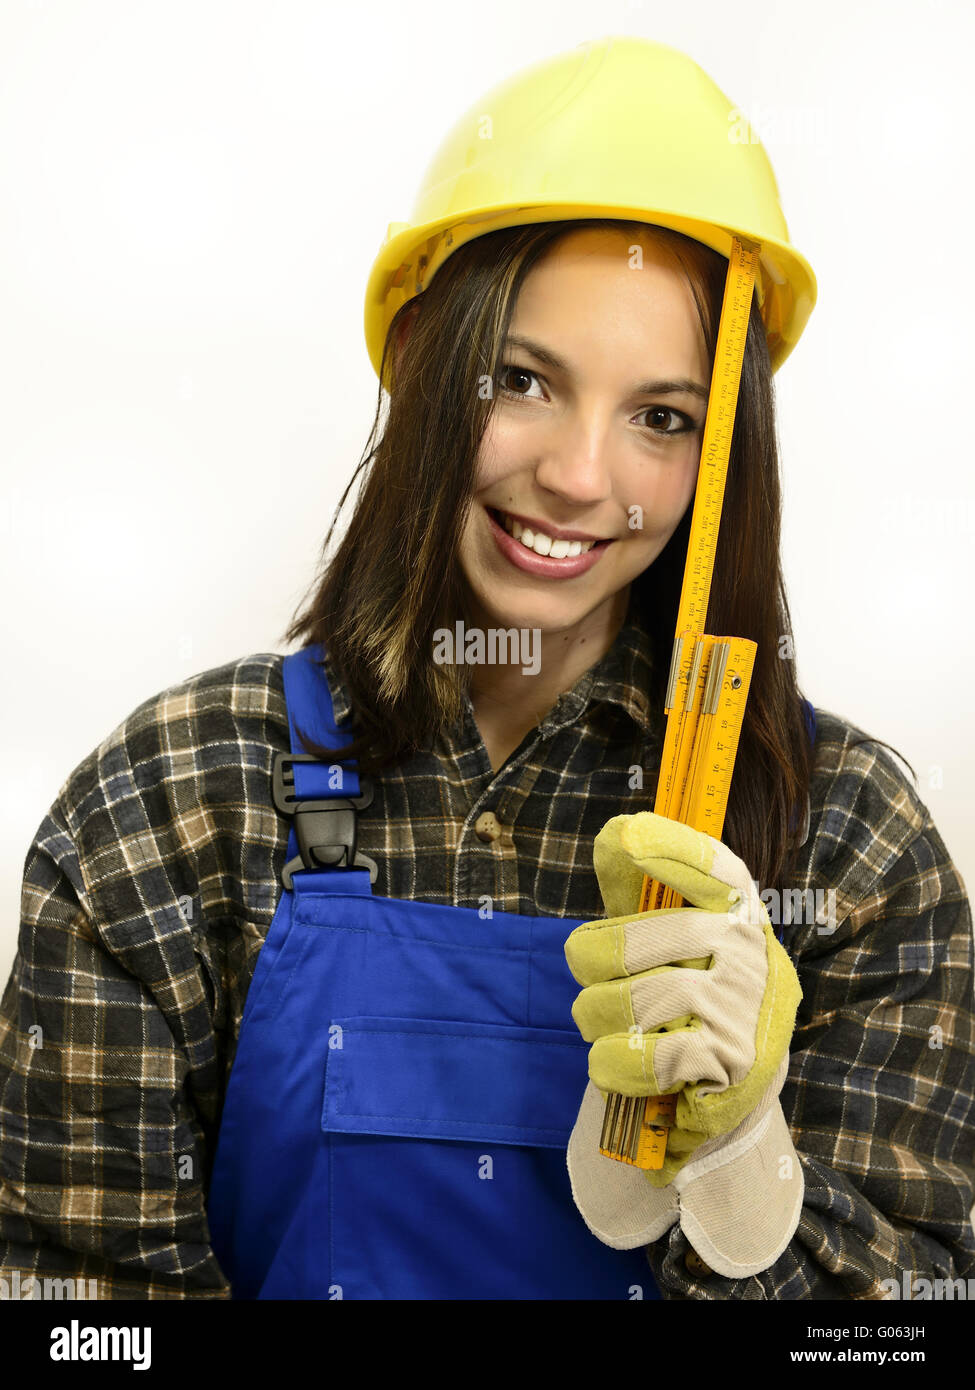 Young woman with helmet and work clothes holding a Stock Photo